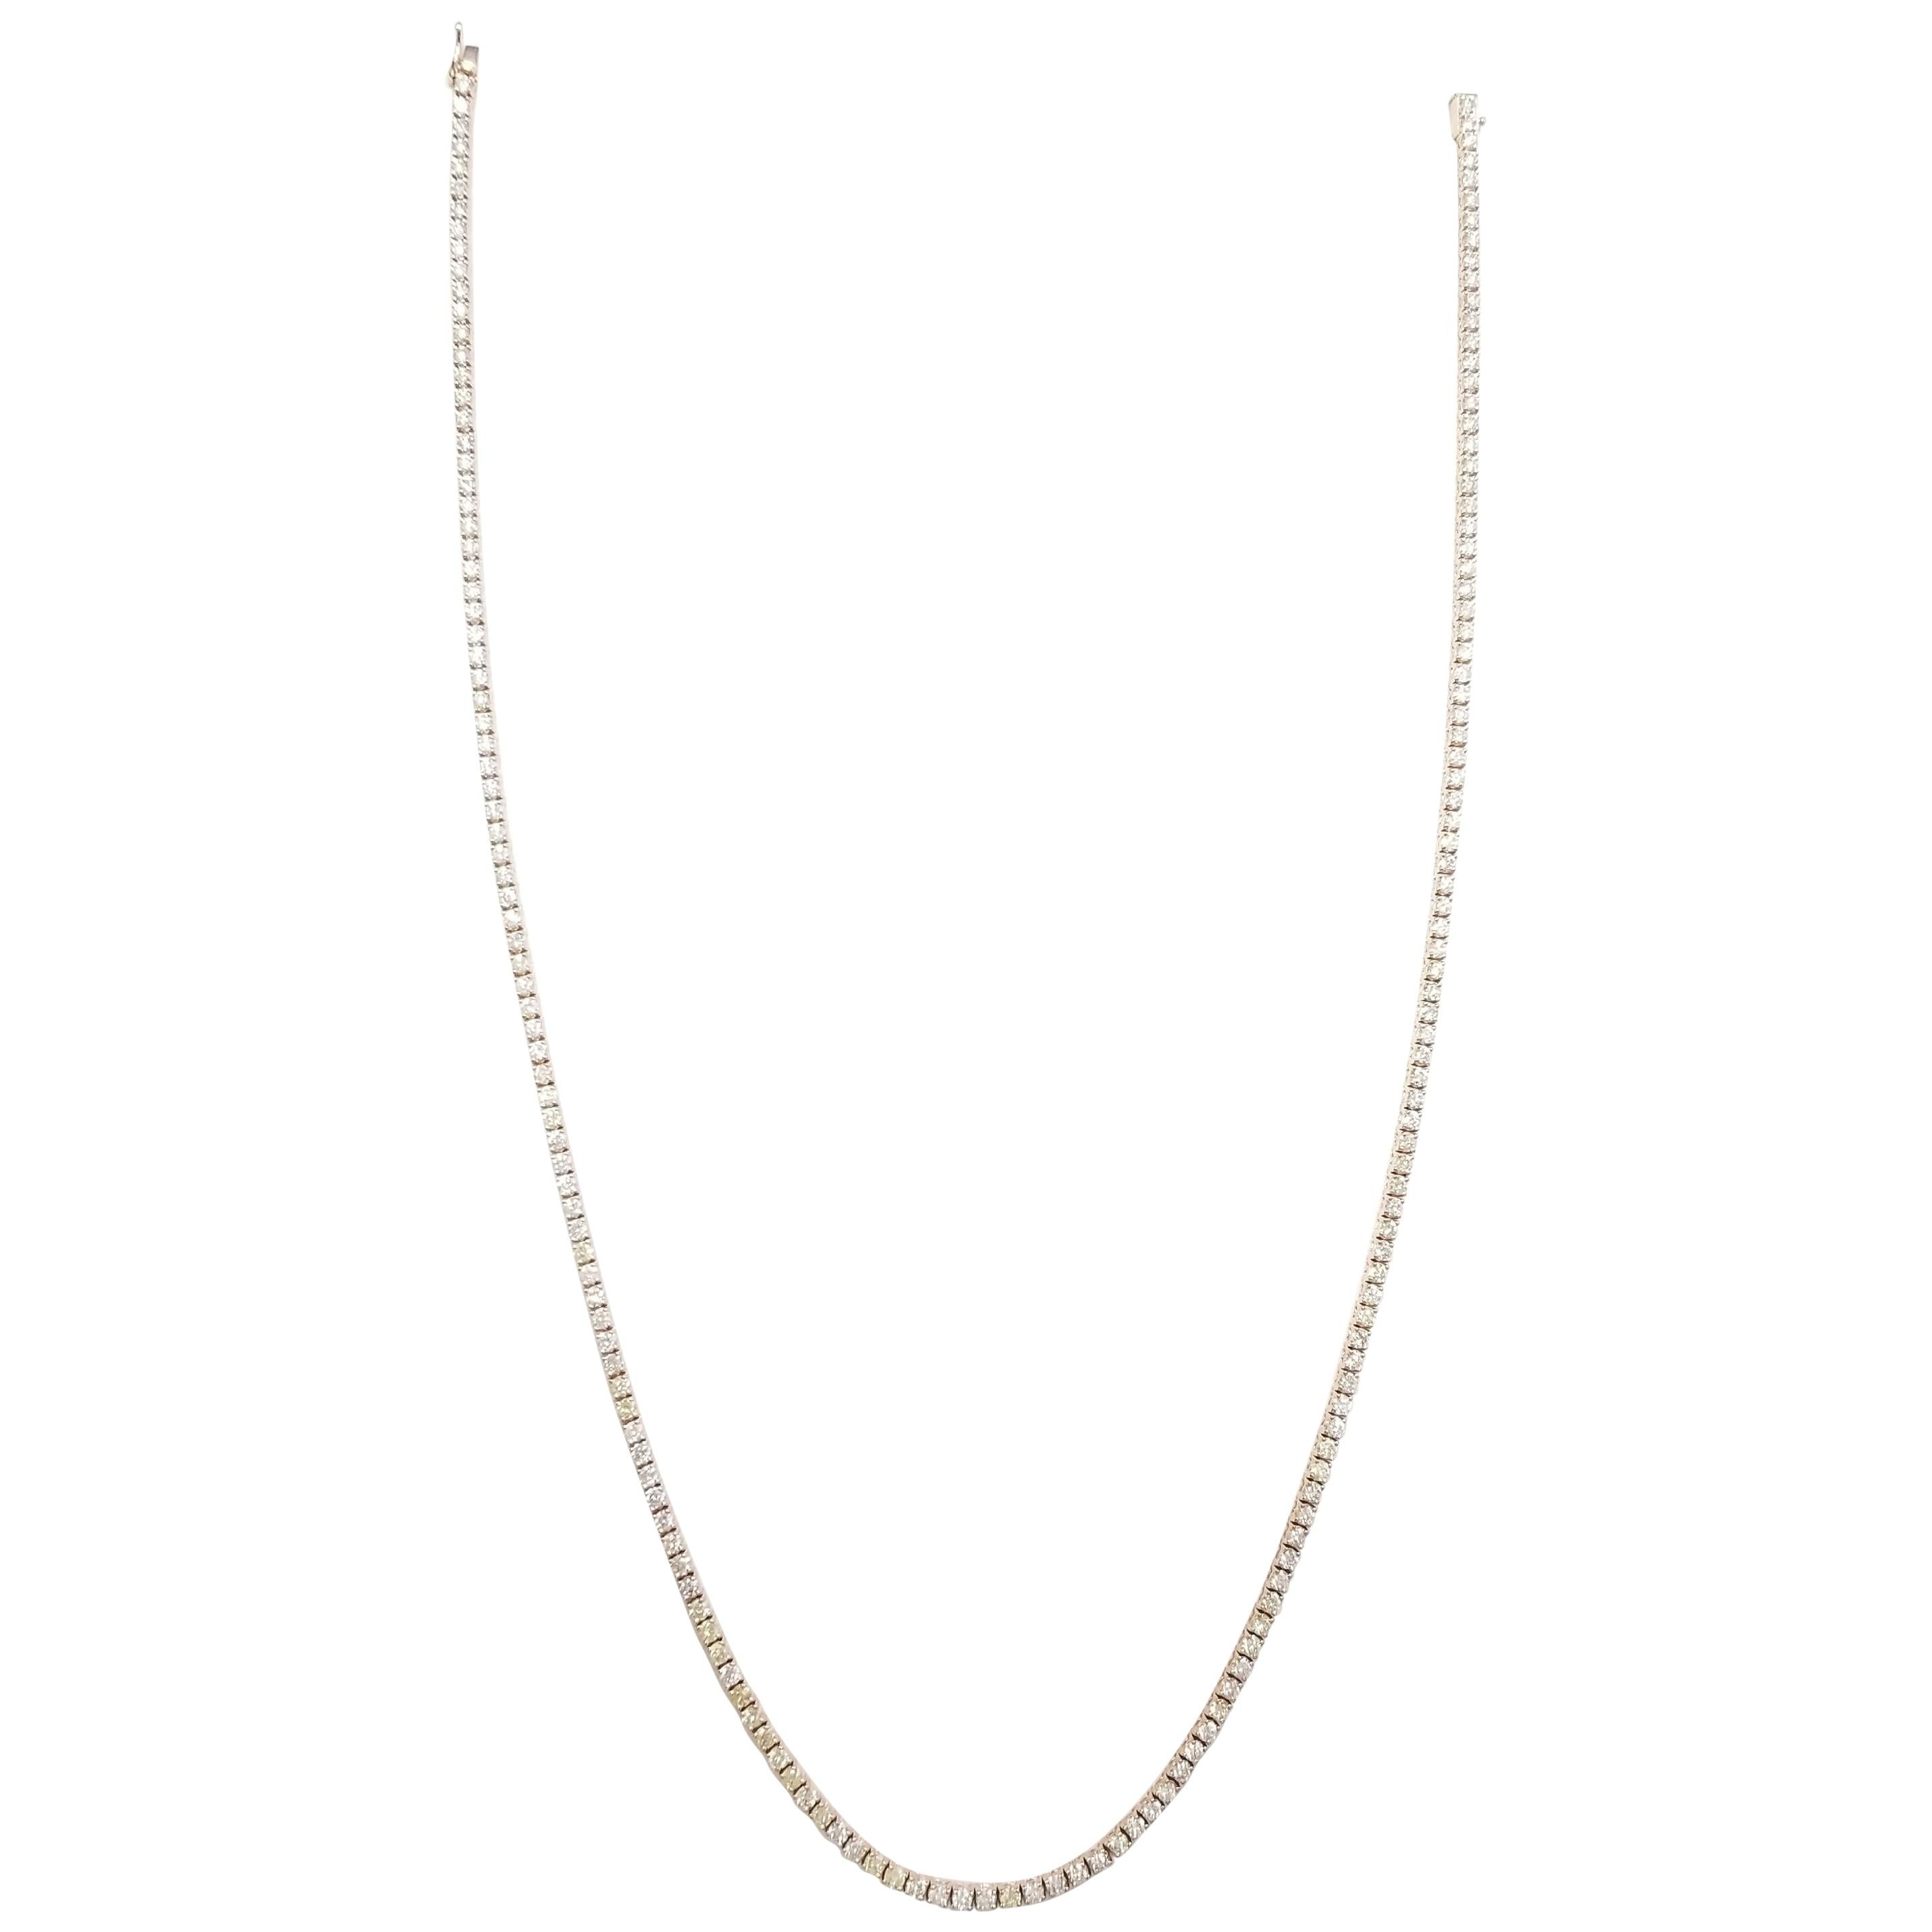 Elegantly simple 14 Karat Yellow Gold Round Brilliant Cut Diamond Tennis Necklace set on 4 prong setting. The total diamond weight is 8.09 carats. The closure is an insert clasp with safety clasp. Length is 18 inches. Average Color H, Clarity SI.